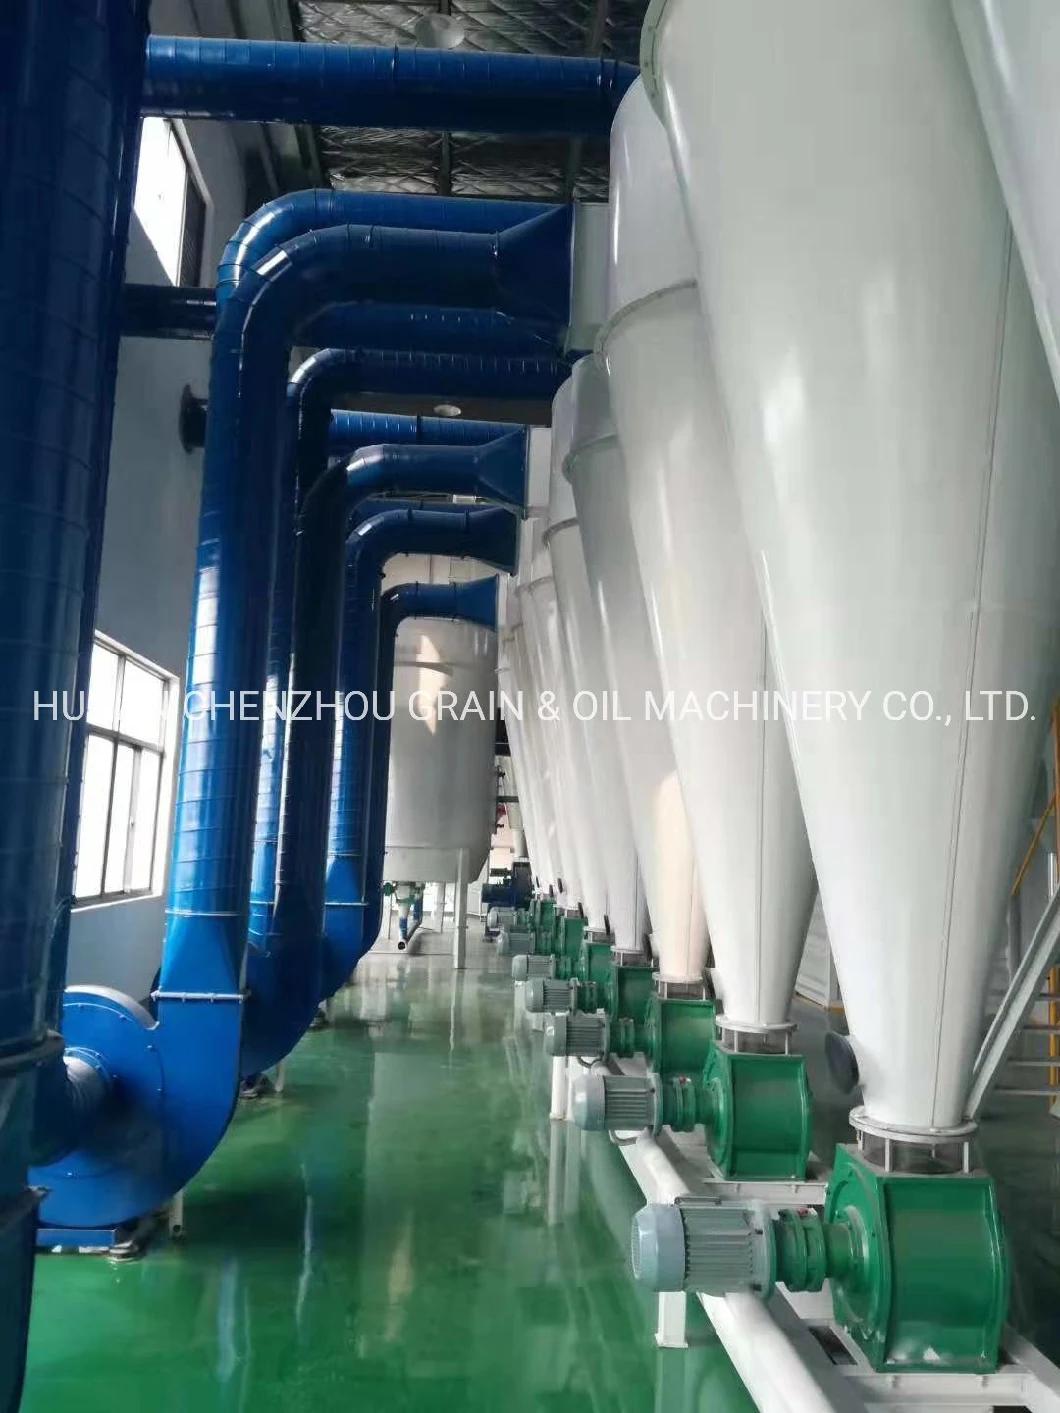 8tph Turn Key Complete Set Parboiled Rice Mill Machine Non-Parboiled and Aromatic Rice Mill Bangladesh Clj Brand